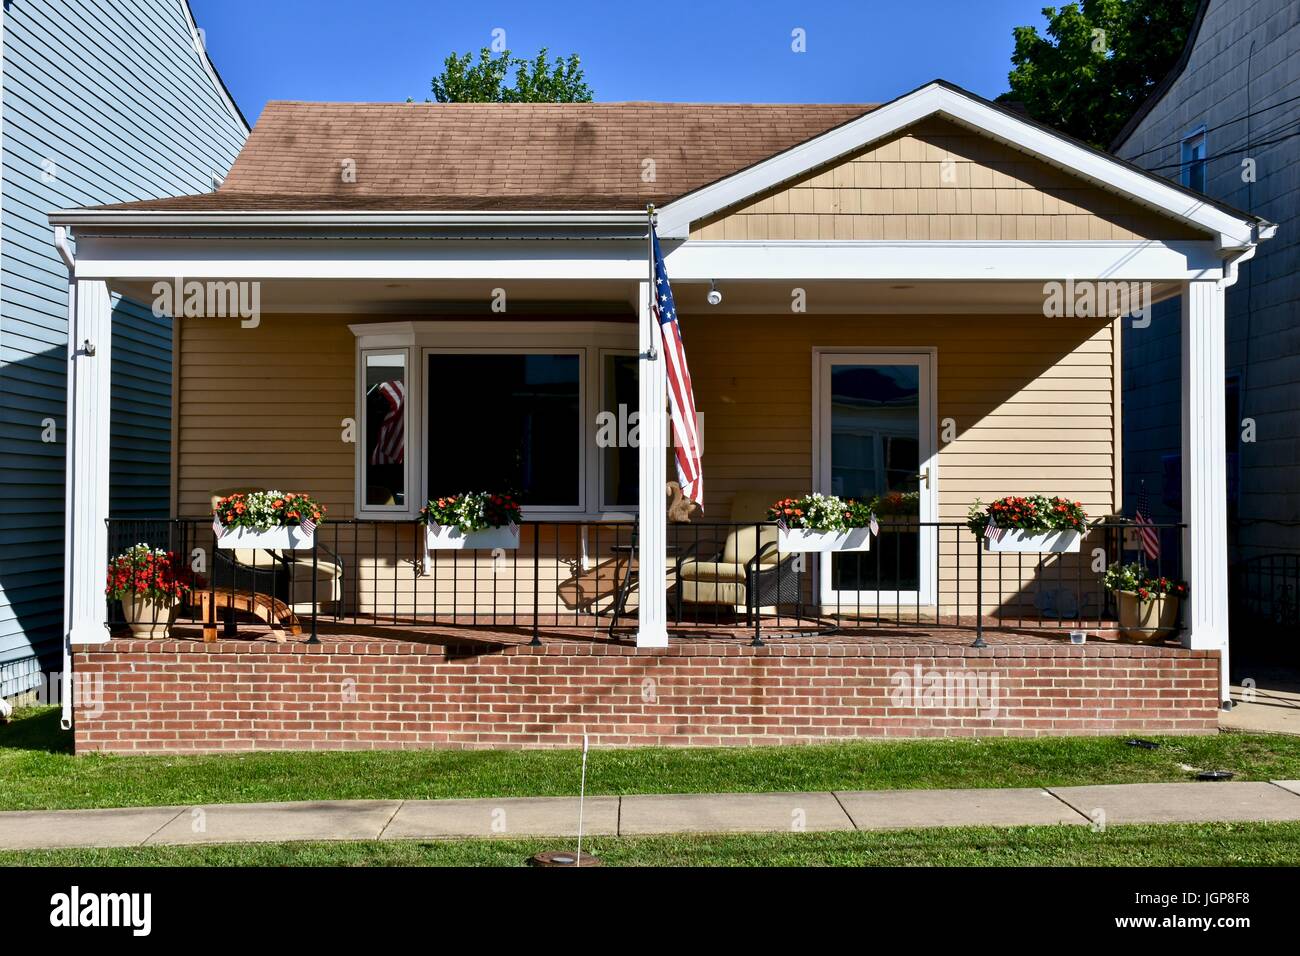 Small house with American flag hanging from front porch Stock Photo